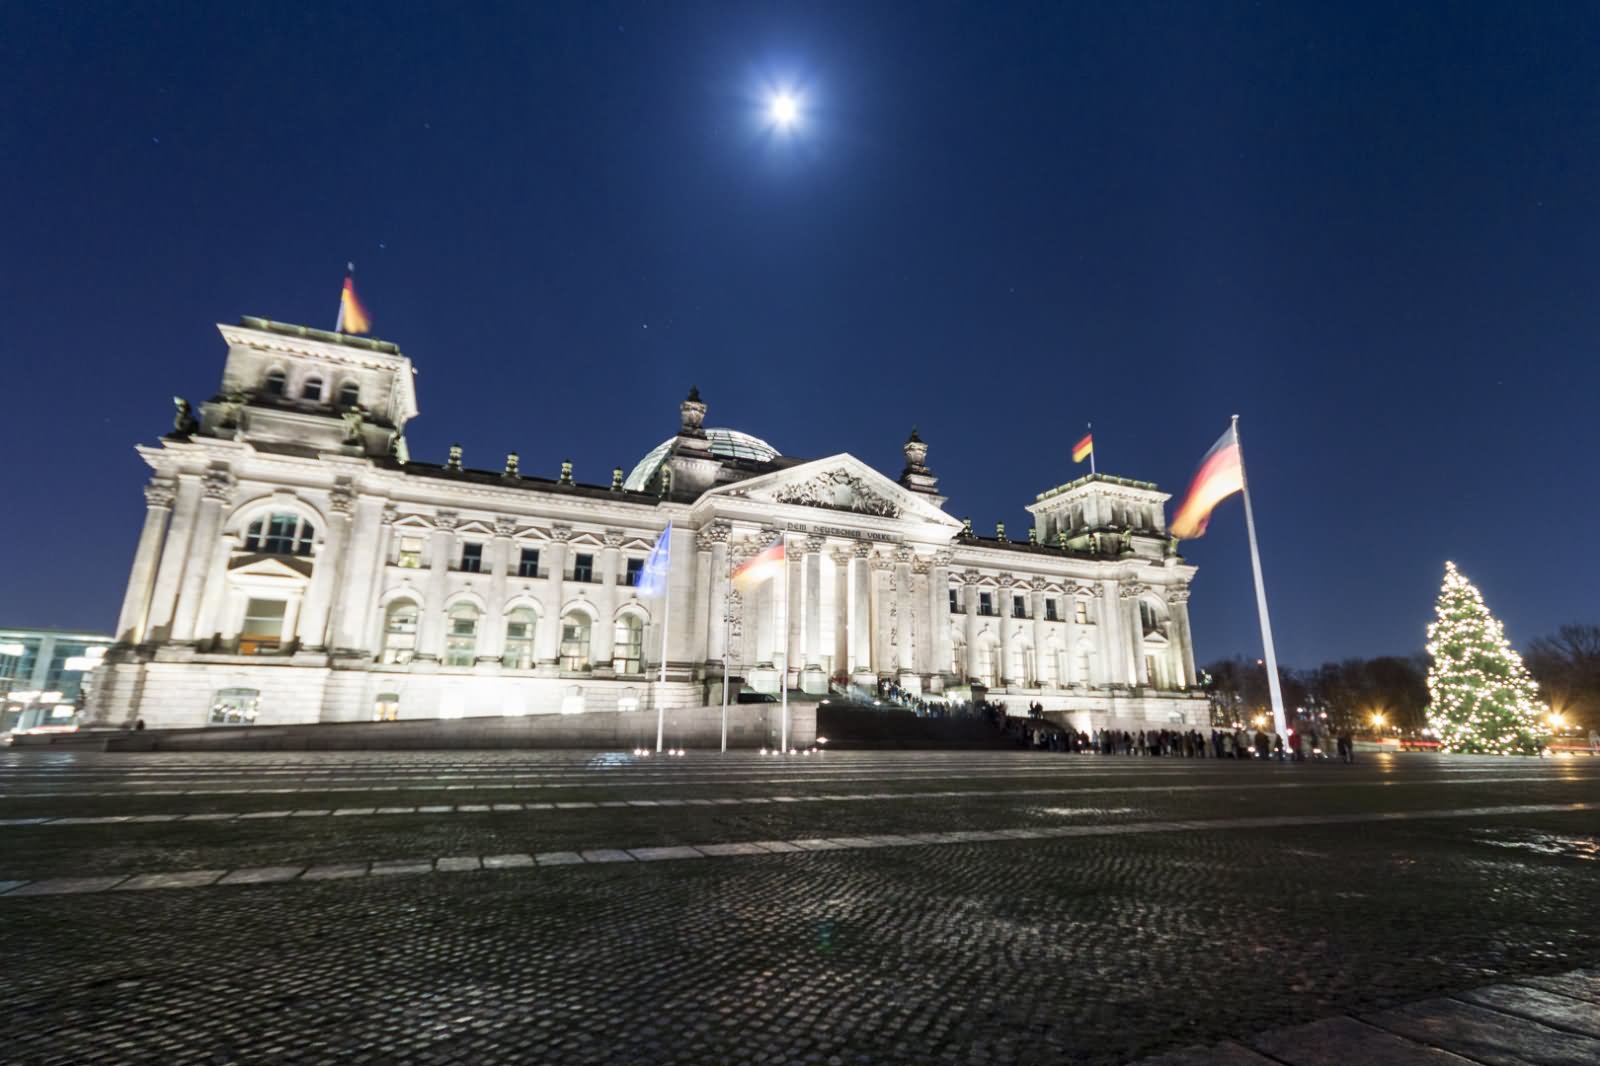 The Reichstag Building In Berlin, Germany By Night With Full Moon